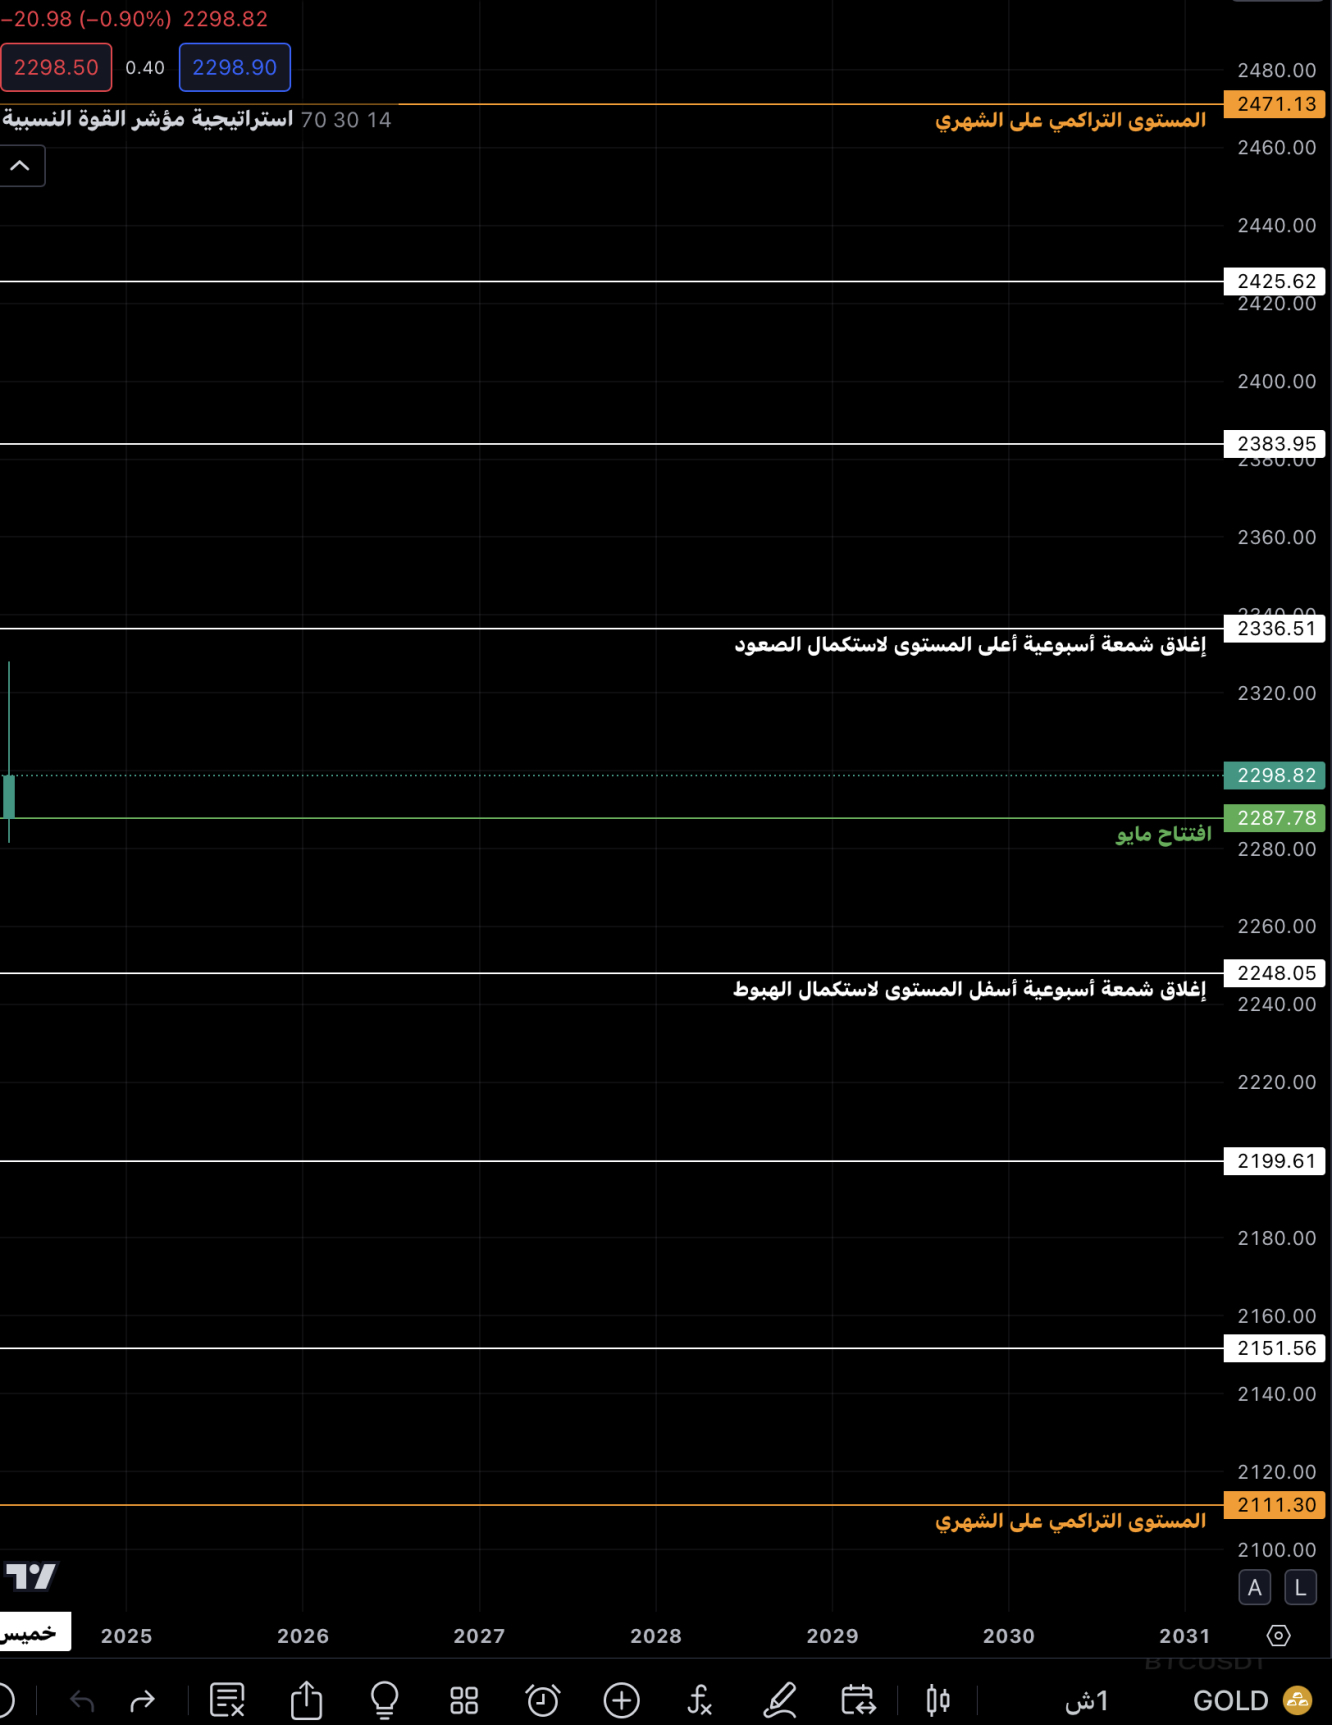 Support and resistance levels for this month on the weekly chart 